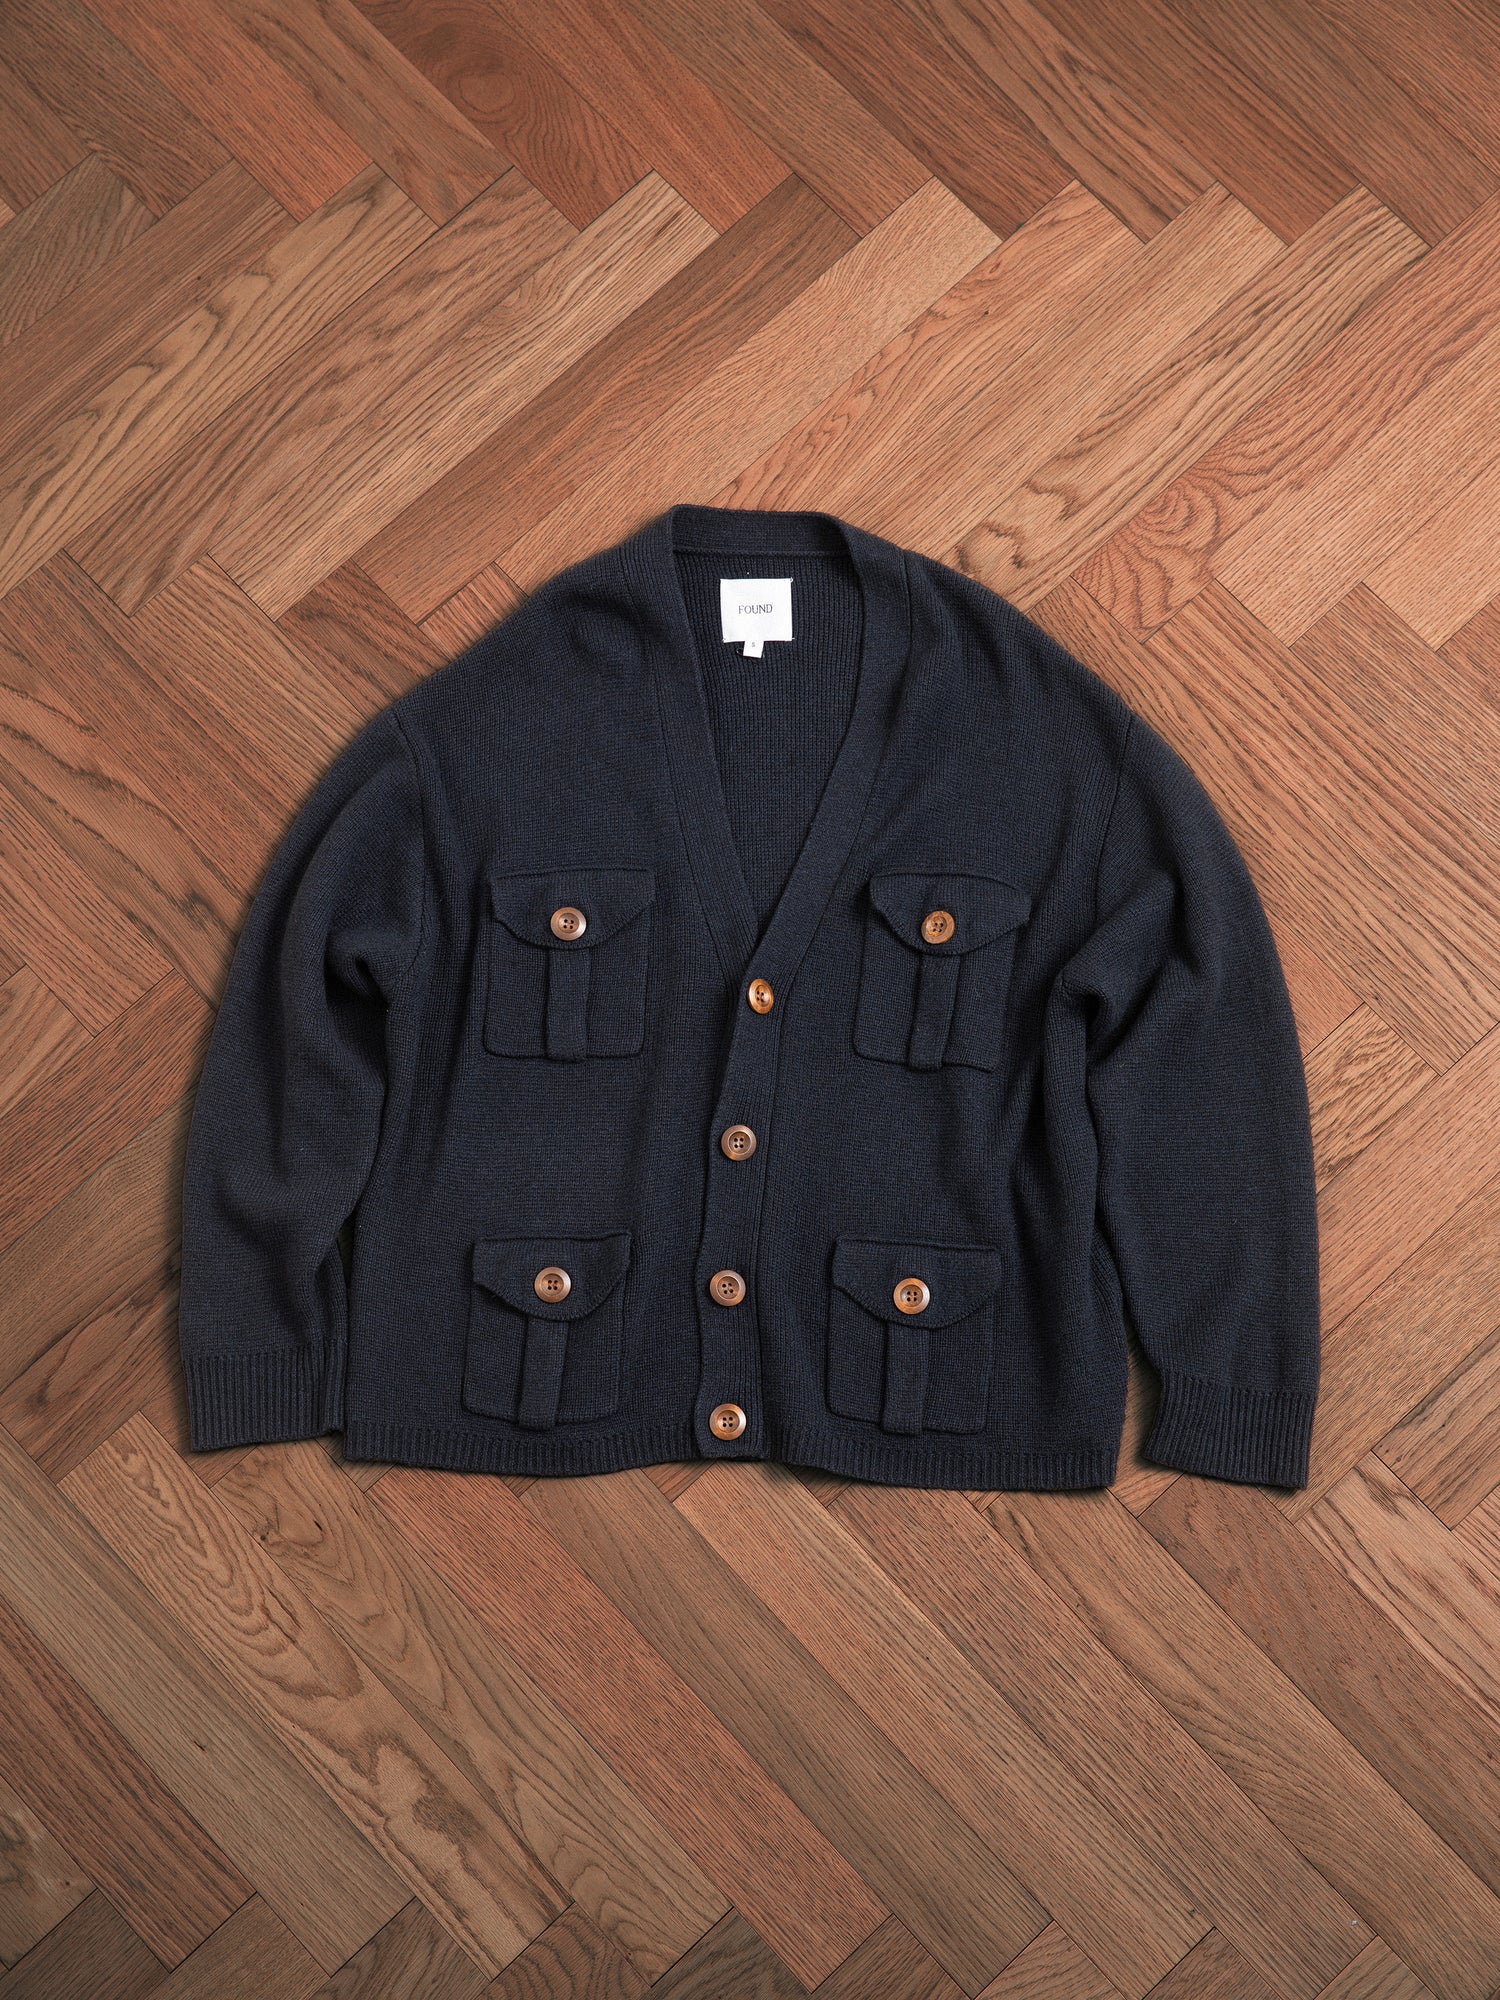 A navy knit fabric Found Lighthouse Multi Pocket Cardigan sitting on a wooden floor.